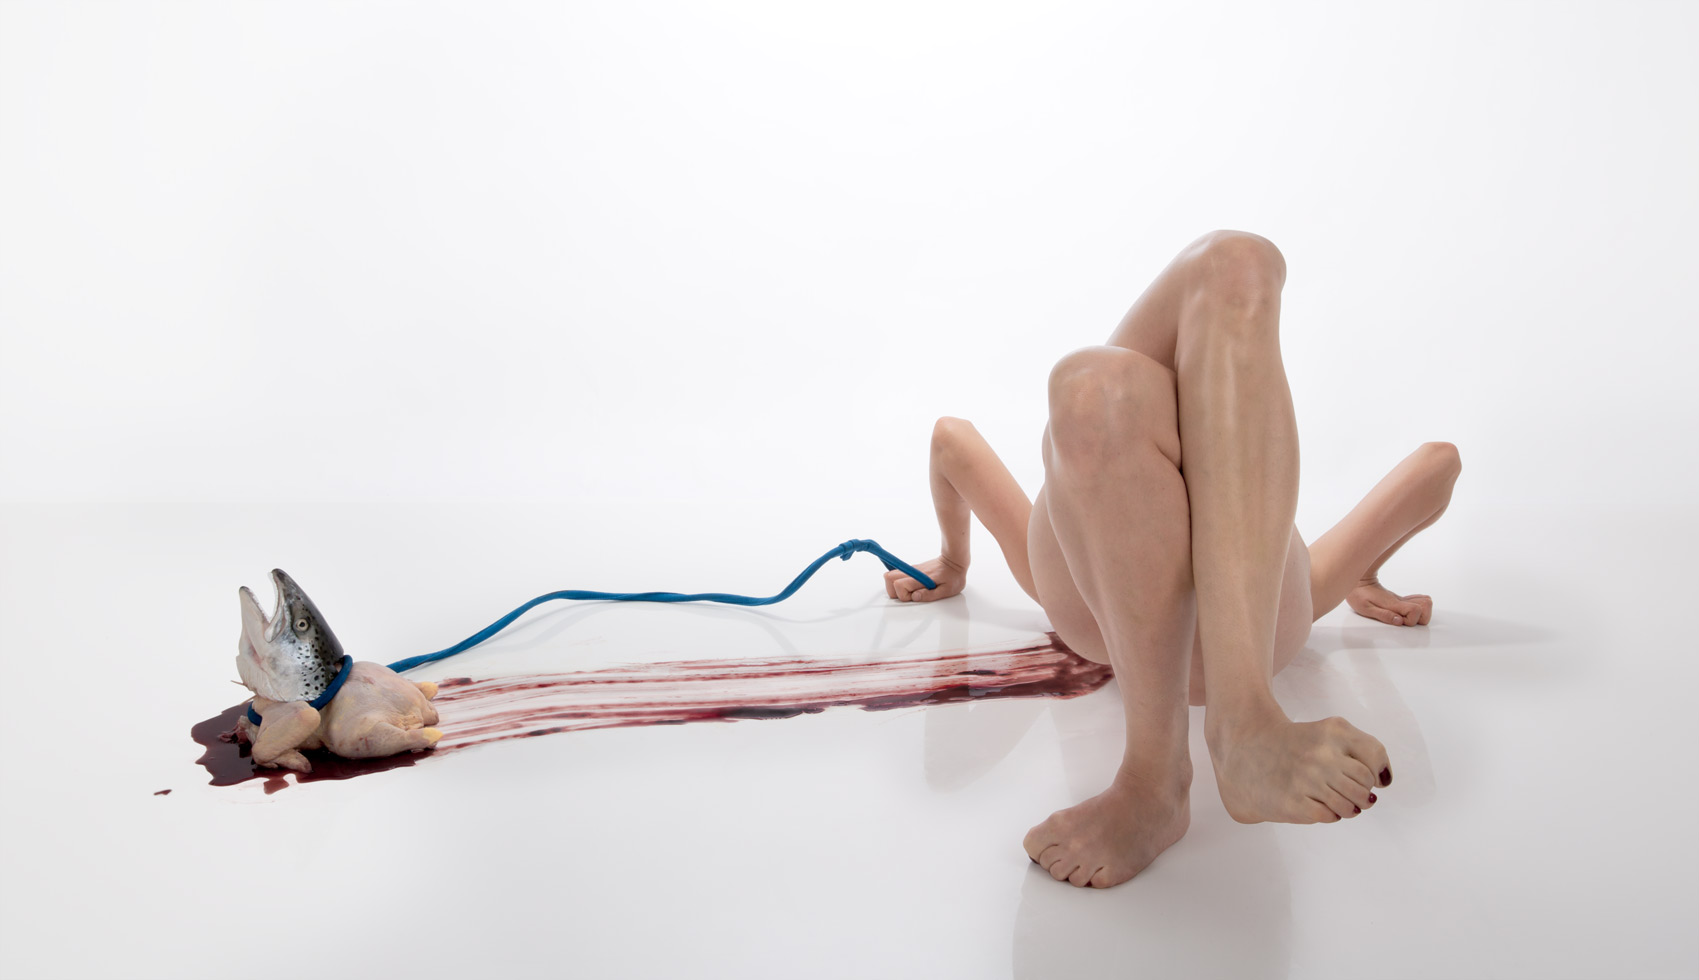 Masha Ermak constructs disconcerting new creatures in her digital photography thesis project.